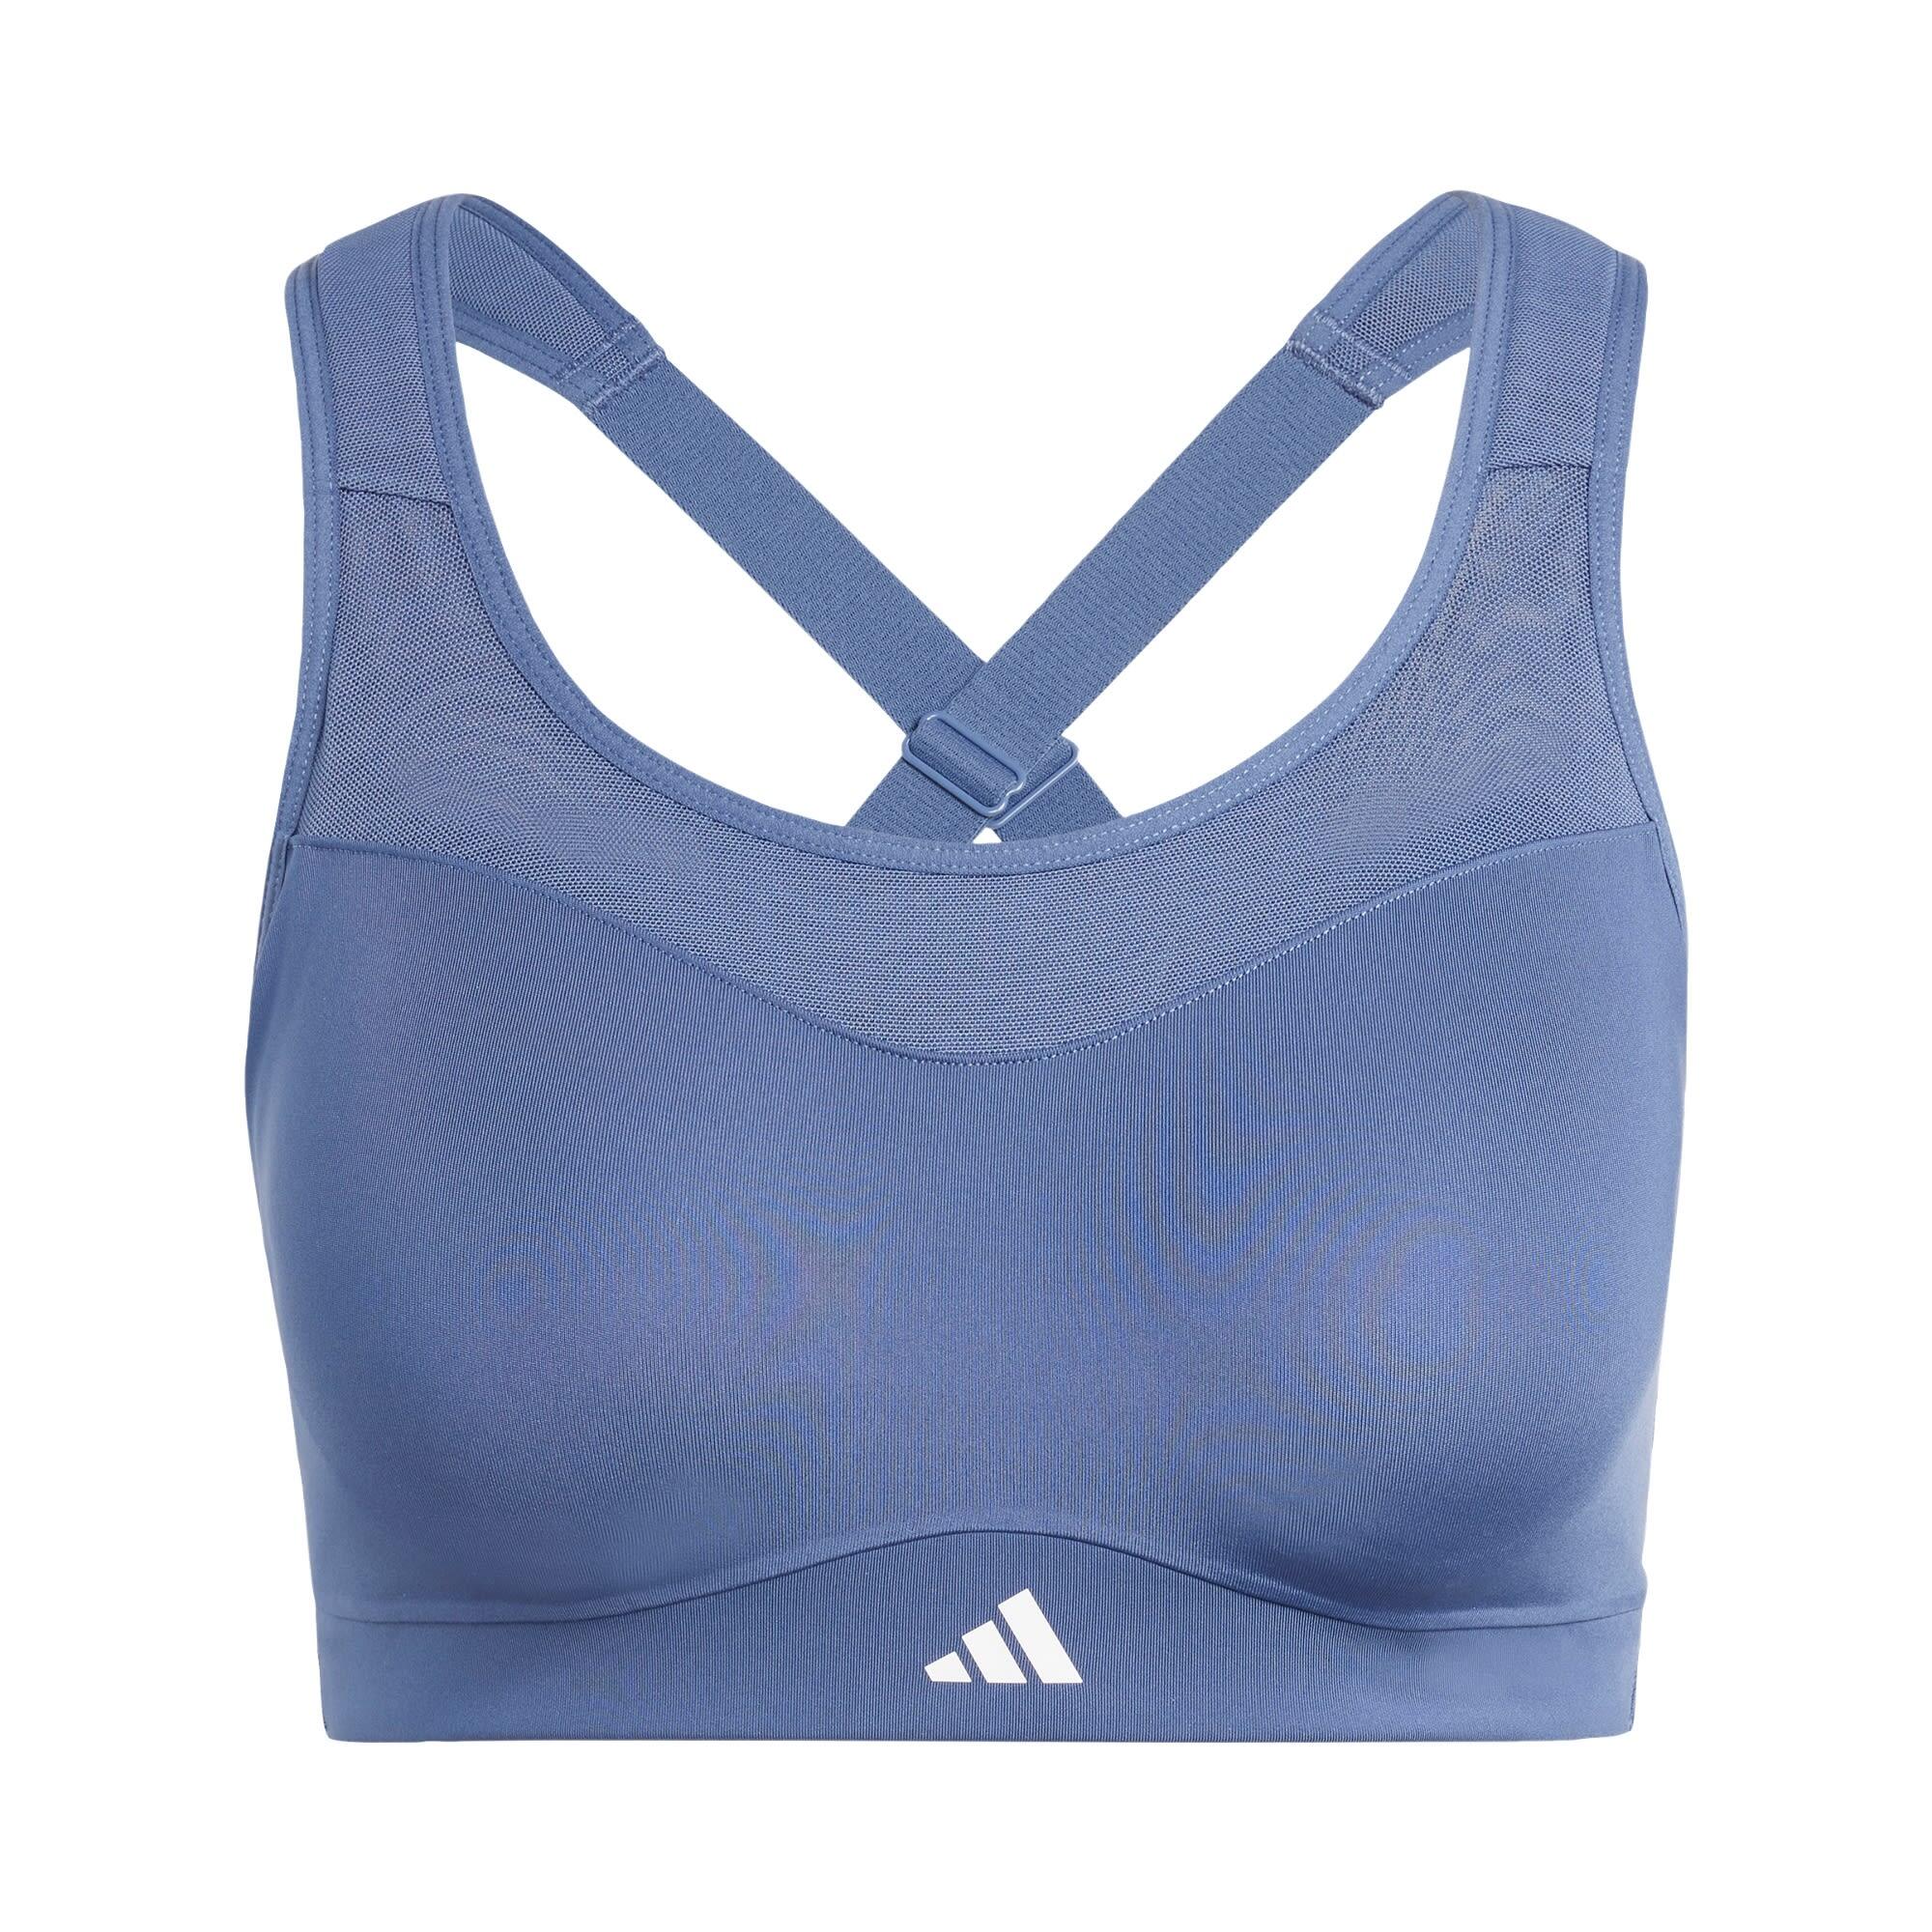 TLRD Impact Training High-Support Bra 2/6